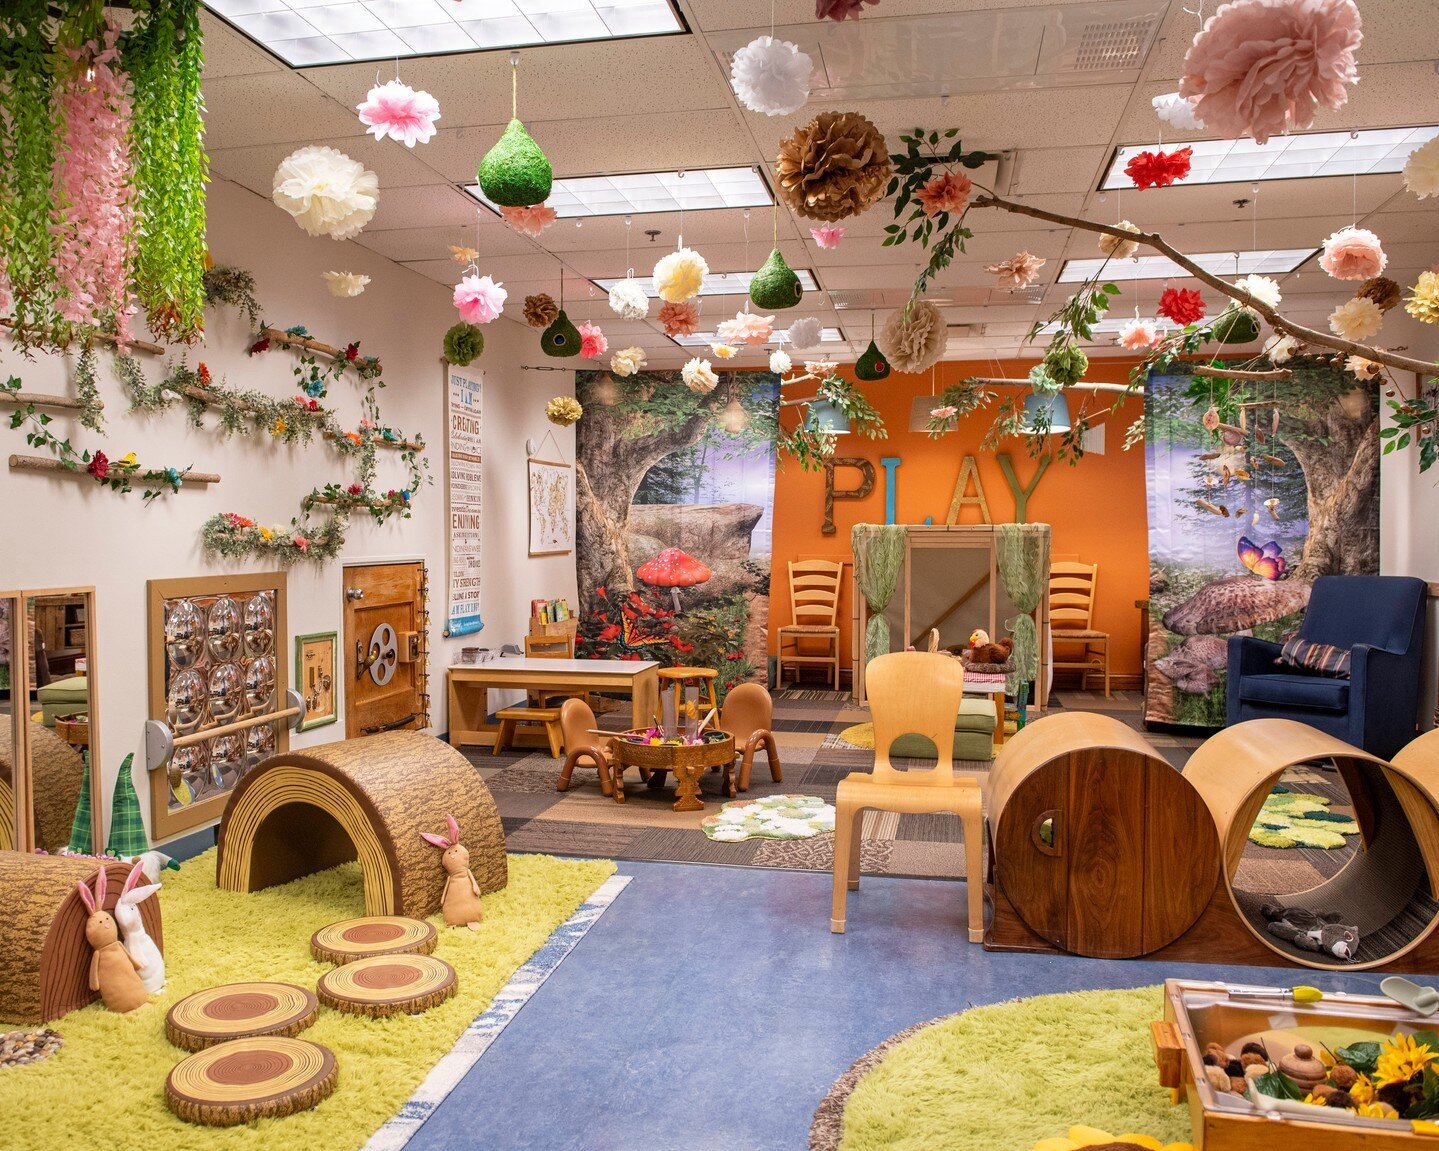 Come join us for a fun adventure in Pritzker Playspace's Enchanted Forest! 🍄🌳✨ It's a magical place where children and families can let their imaginations run wild, sharpen their observation skills, and engage their senses in a beautiful woodland g